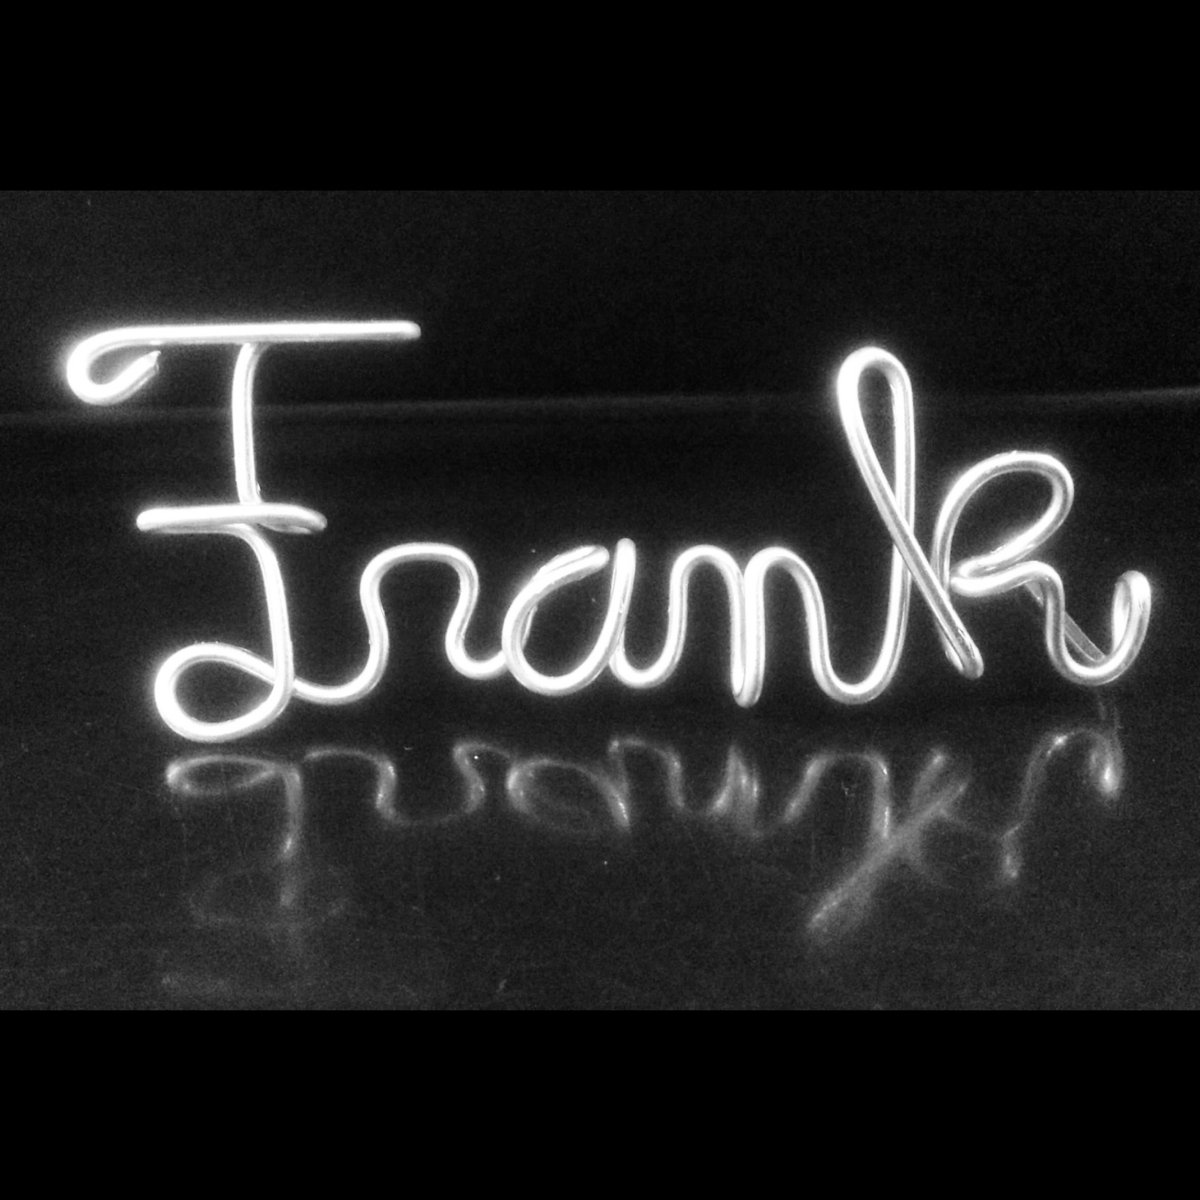 #TheWireNameOfTheDay #Frank 

by Dave Maskin  #TheAmazingWireMan 
davemaskin.wixsite.com/theamazingwire…
3D #wirenames created in front of your guests at your #privateparty #corporateevent or inside your #tradeshowbooth